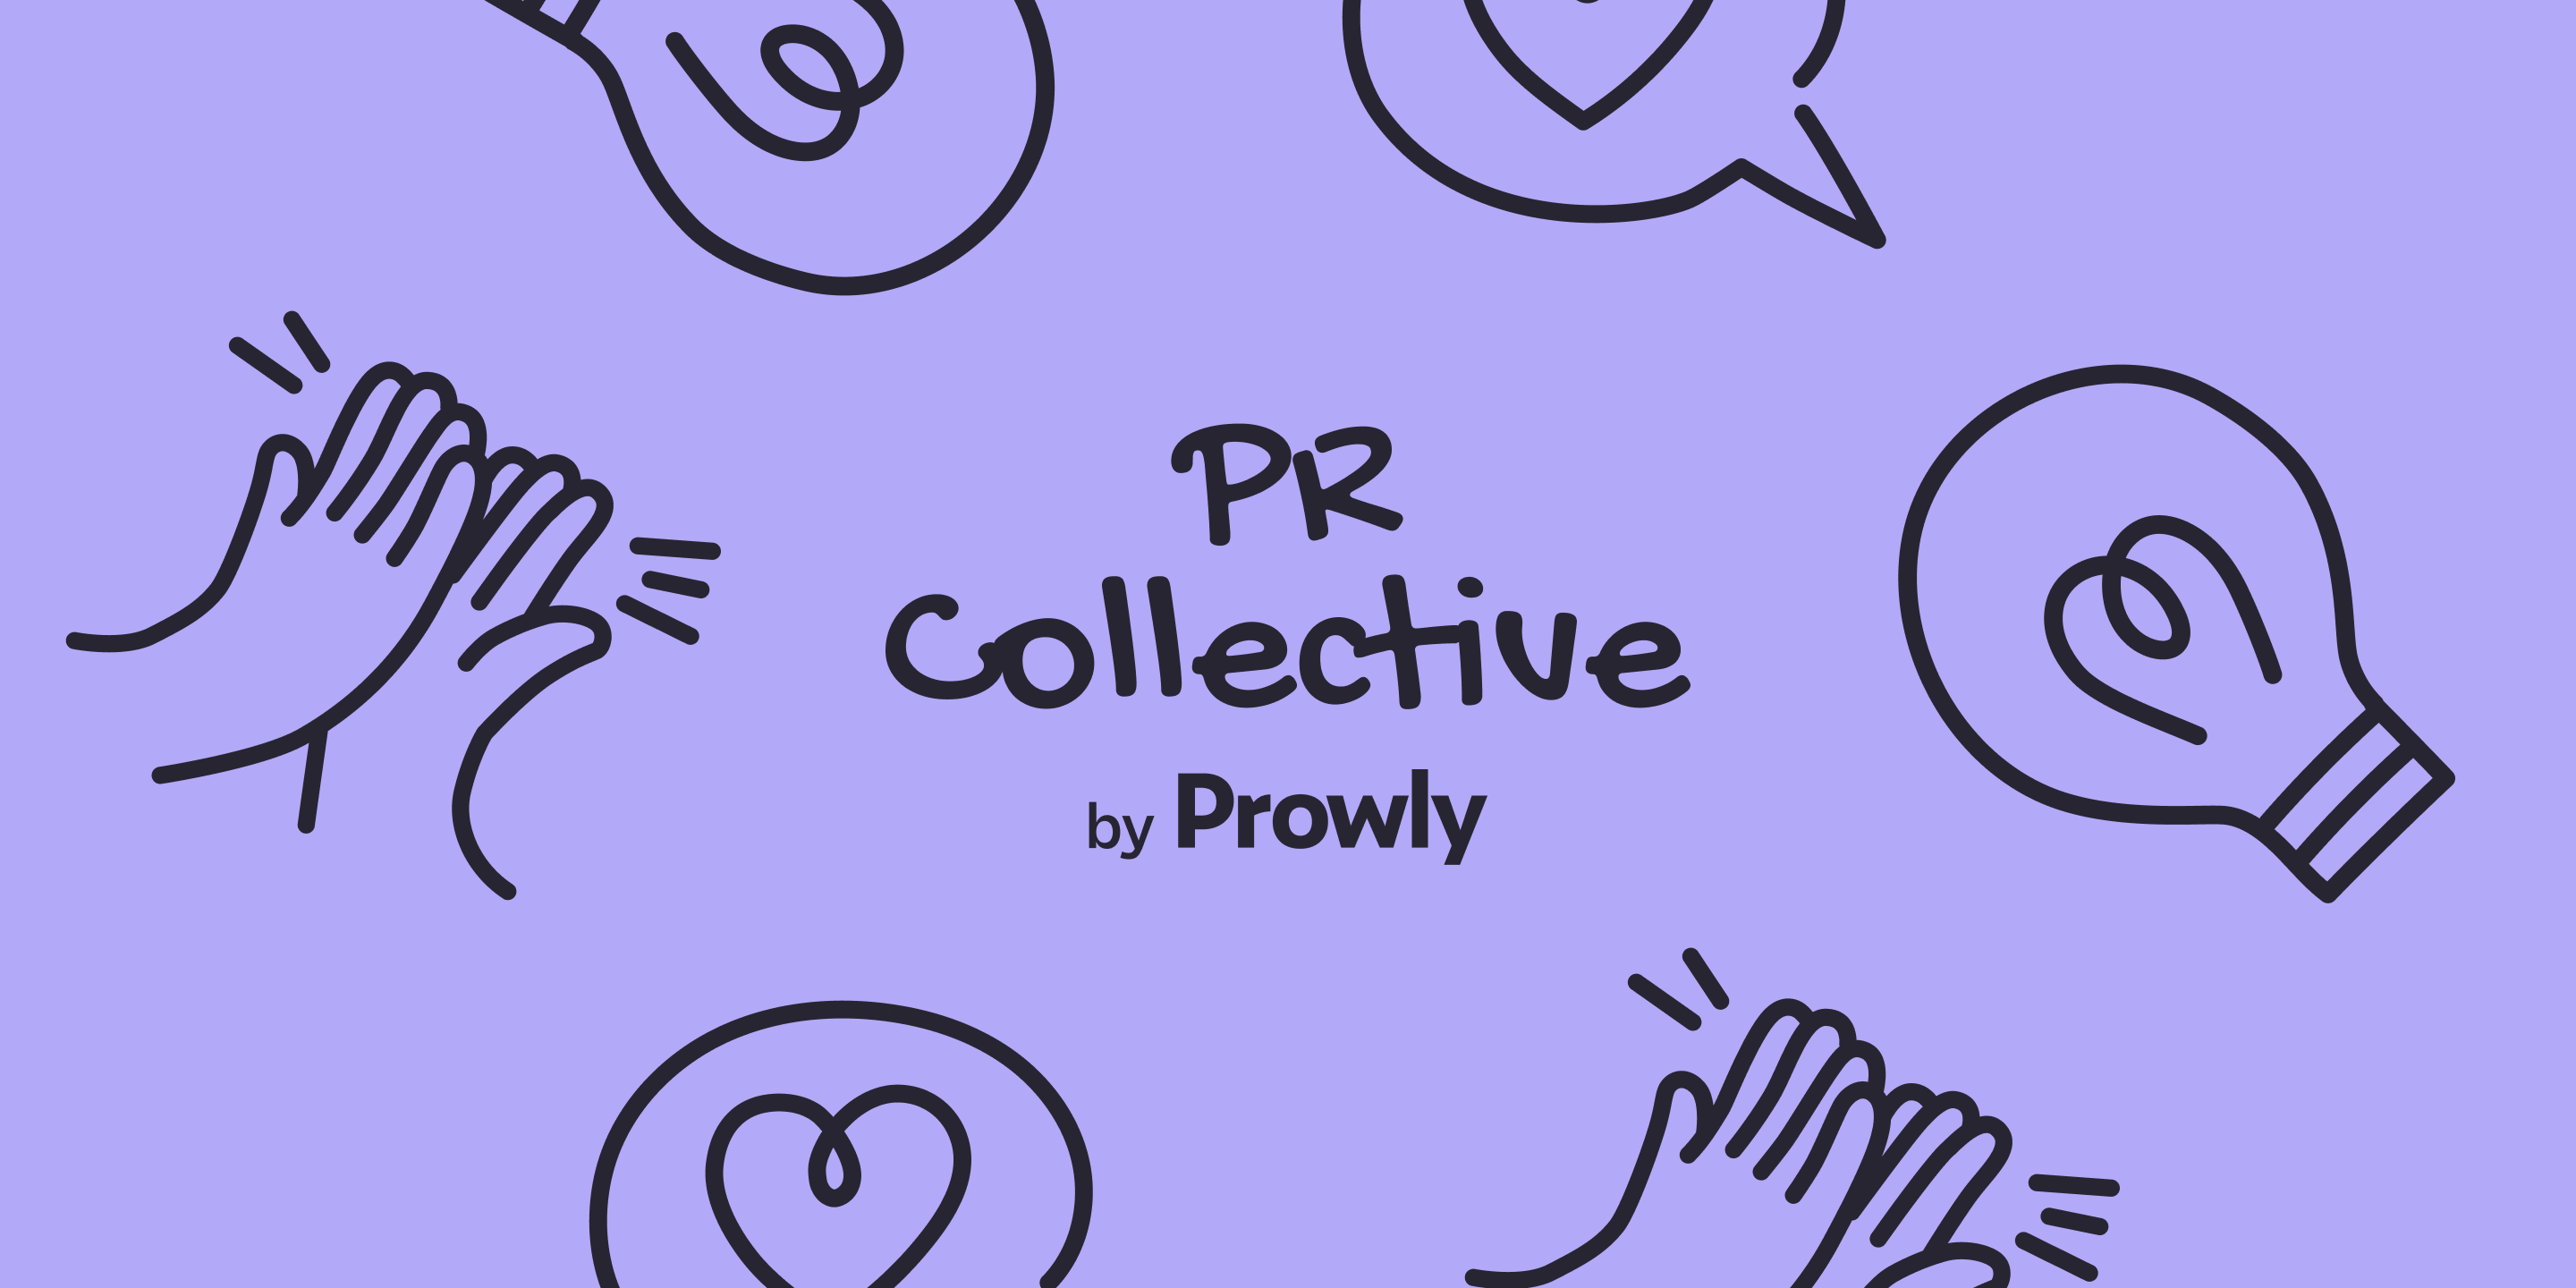 PR Collective by Prowly